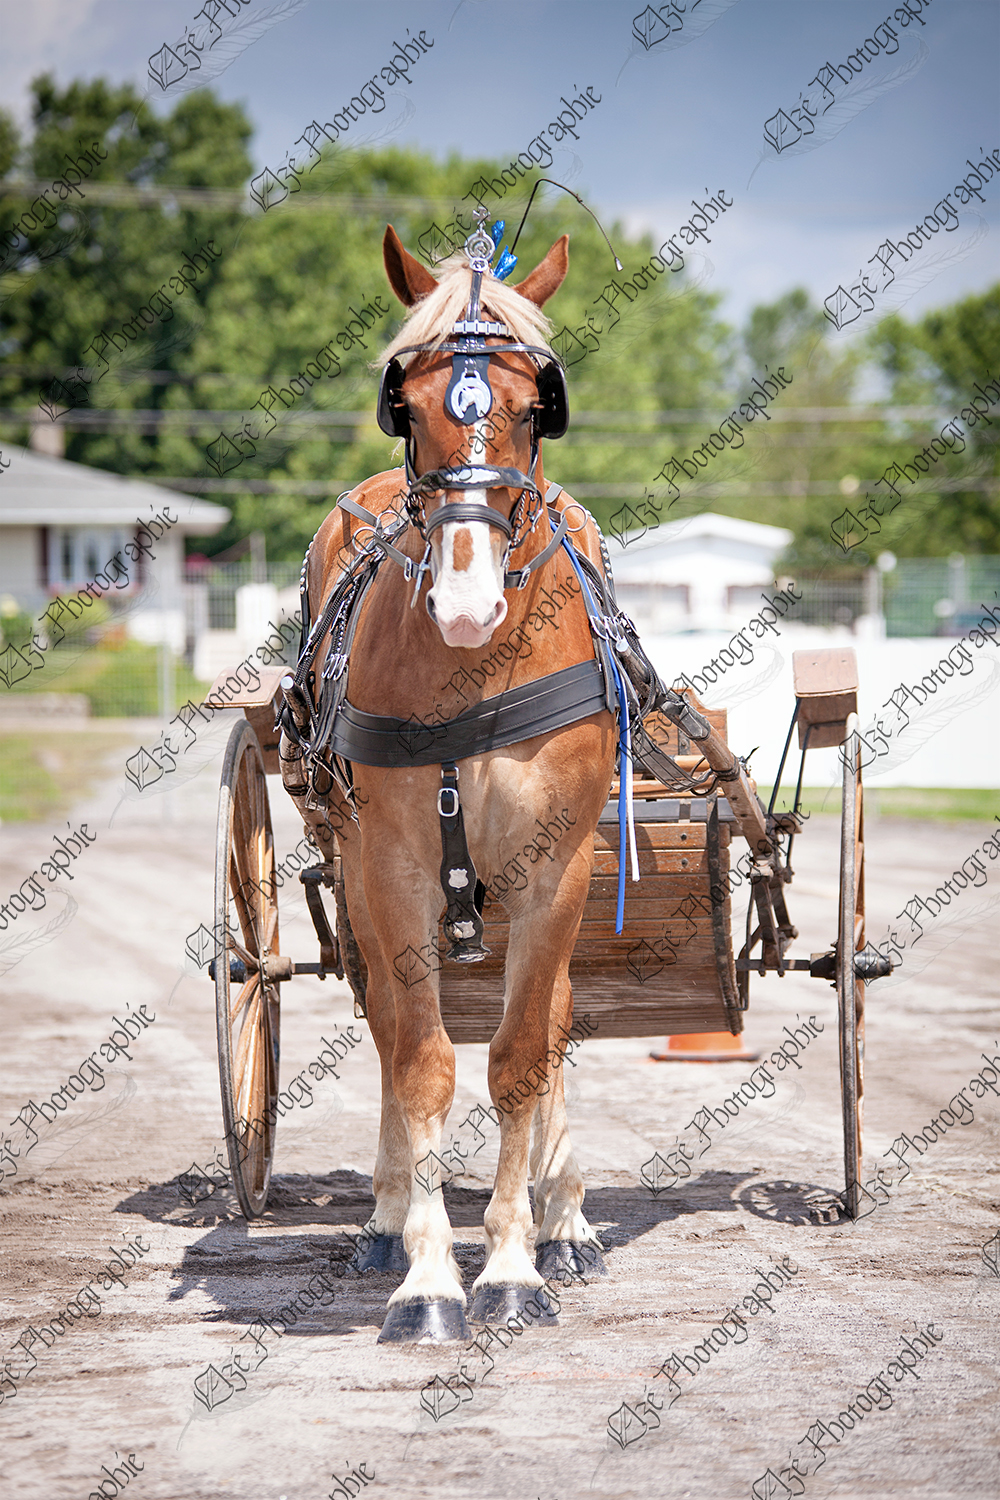 elze_photo_6909_cheval_attele_belge_hitch_in_show_horse